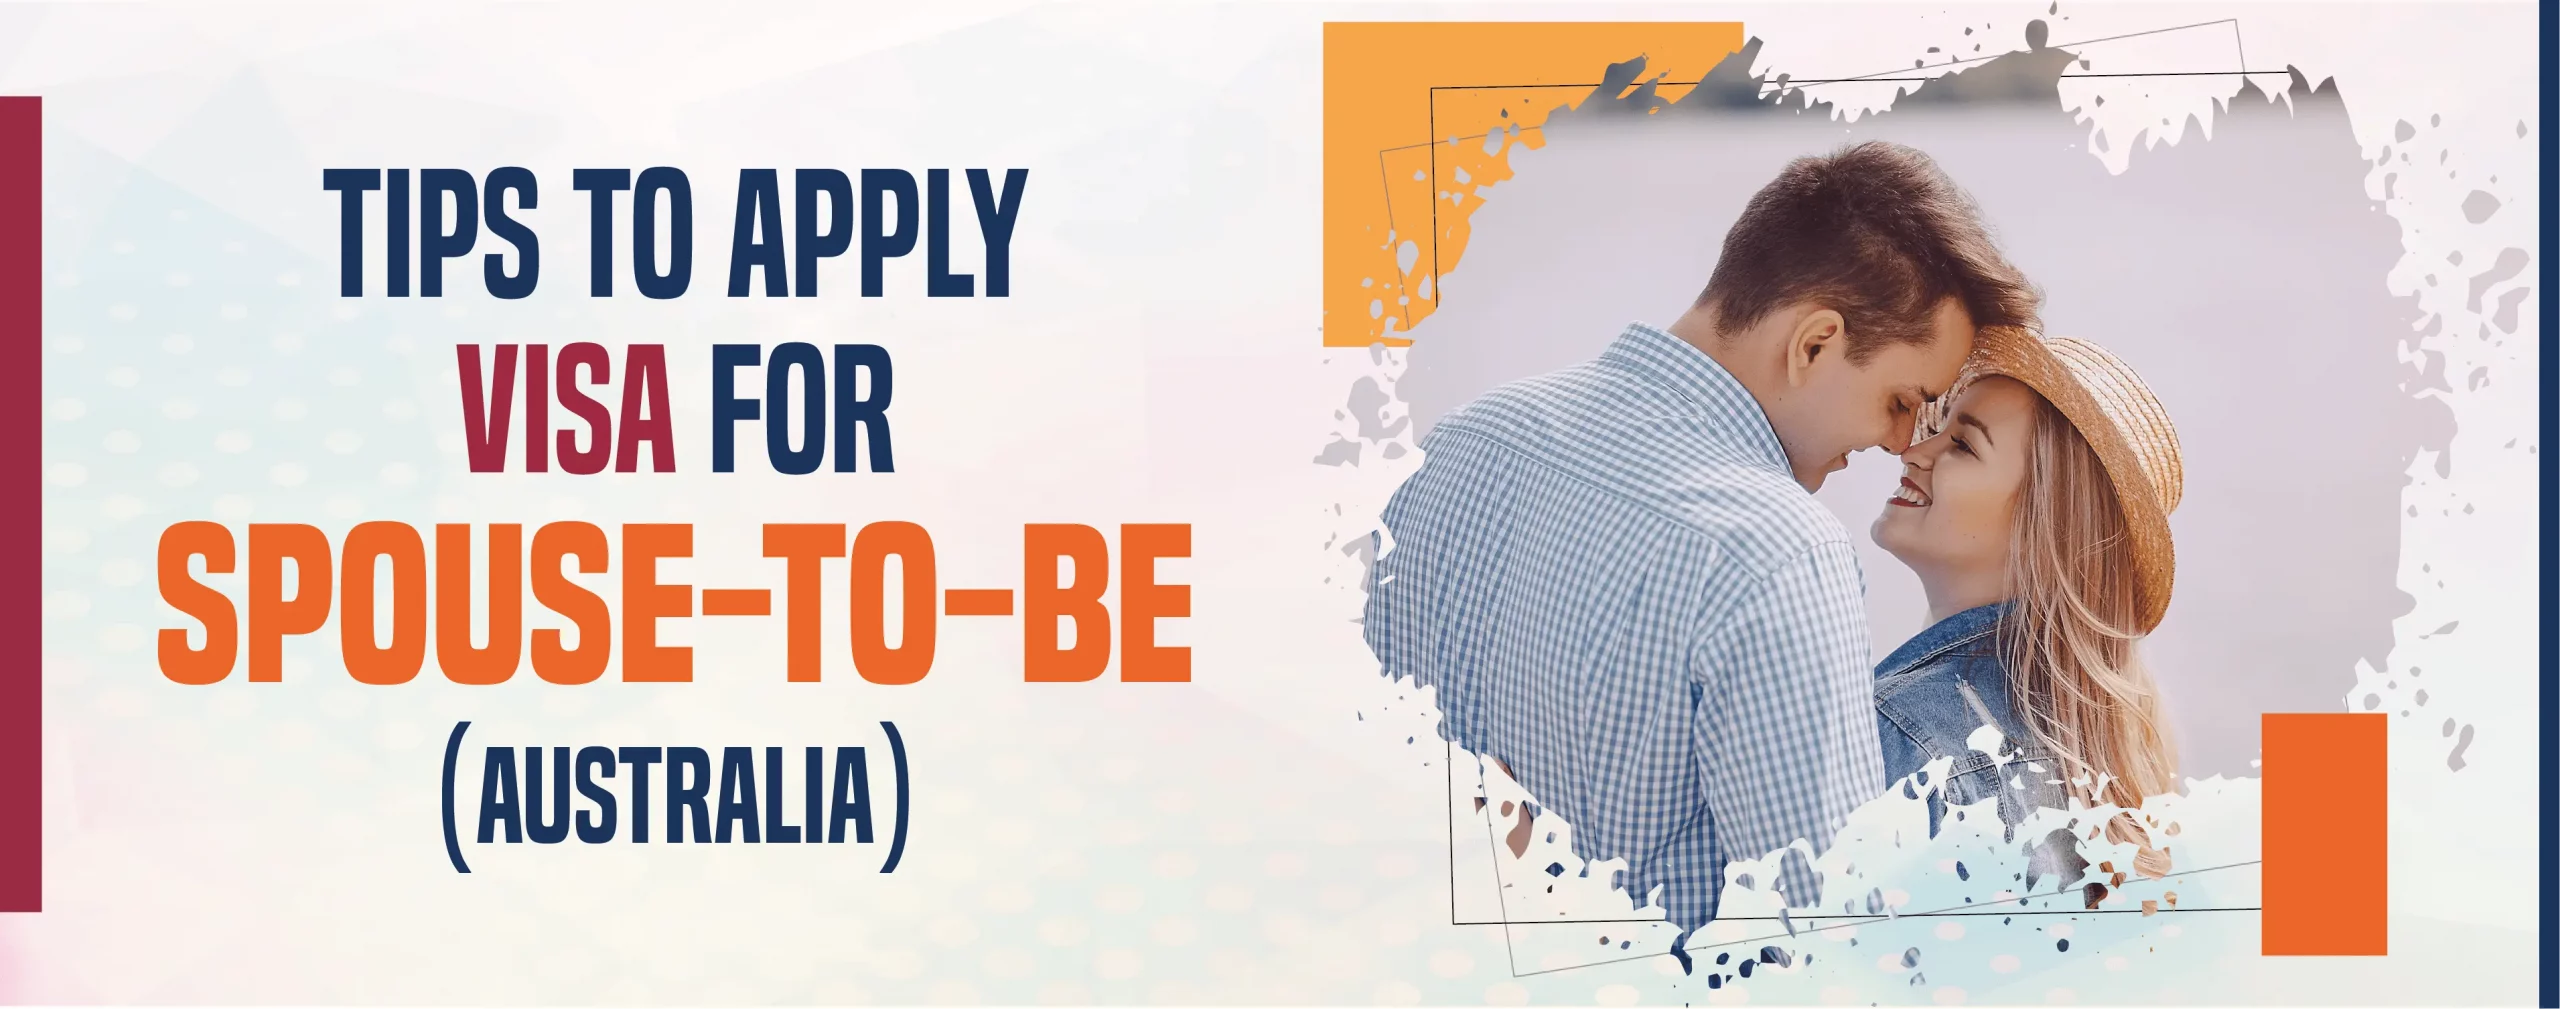 Tips to Apply for a Partner Visa for Your Future Spouse in Australia